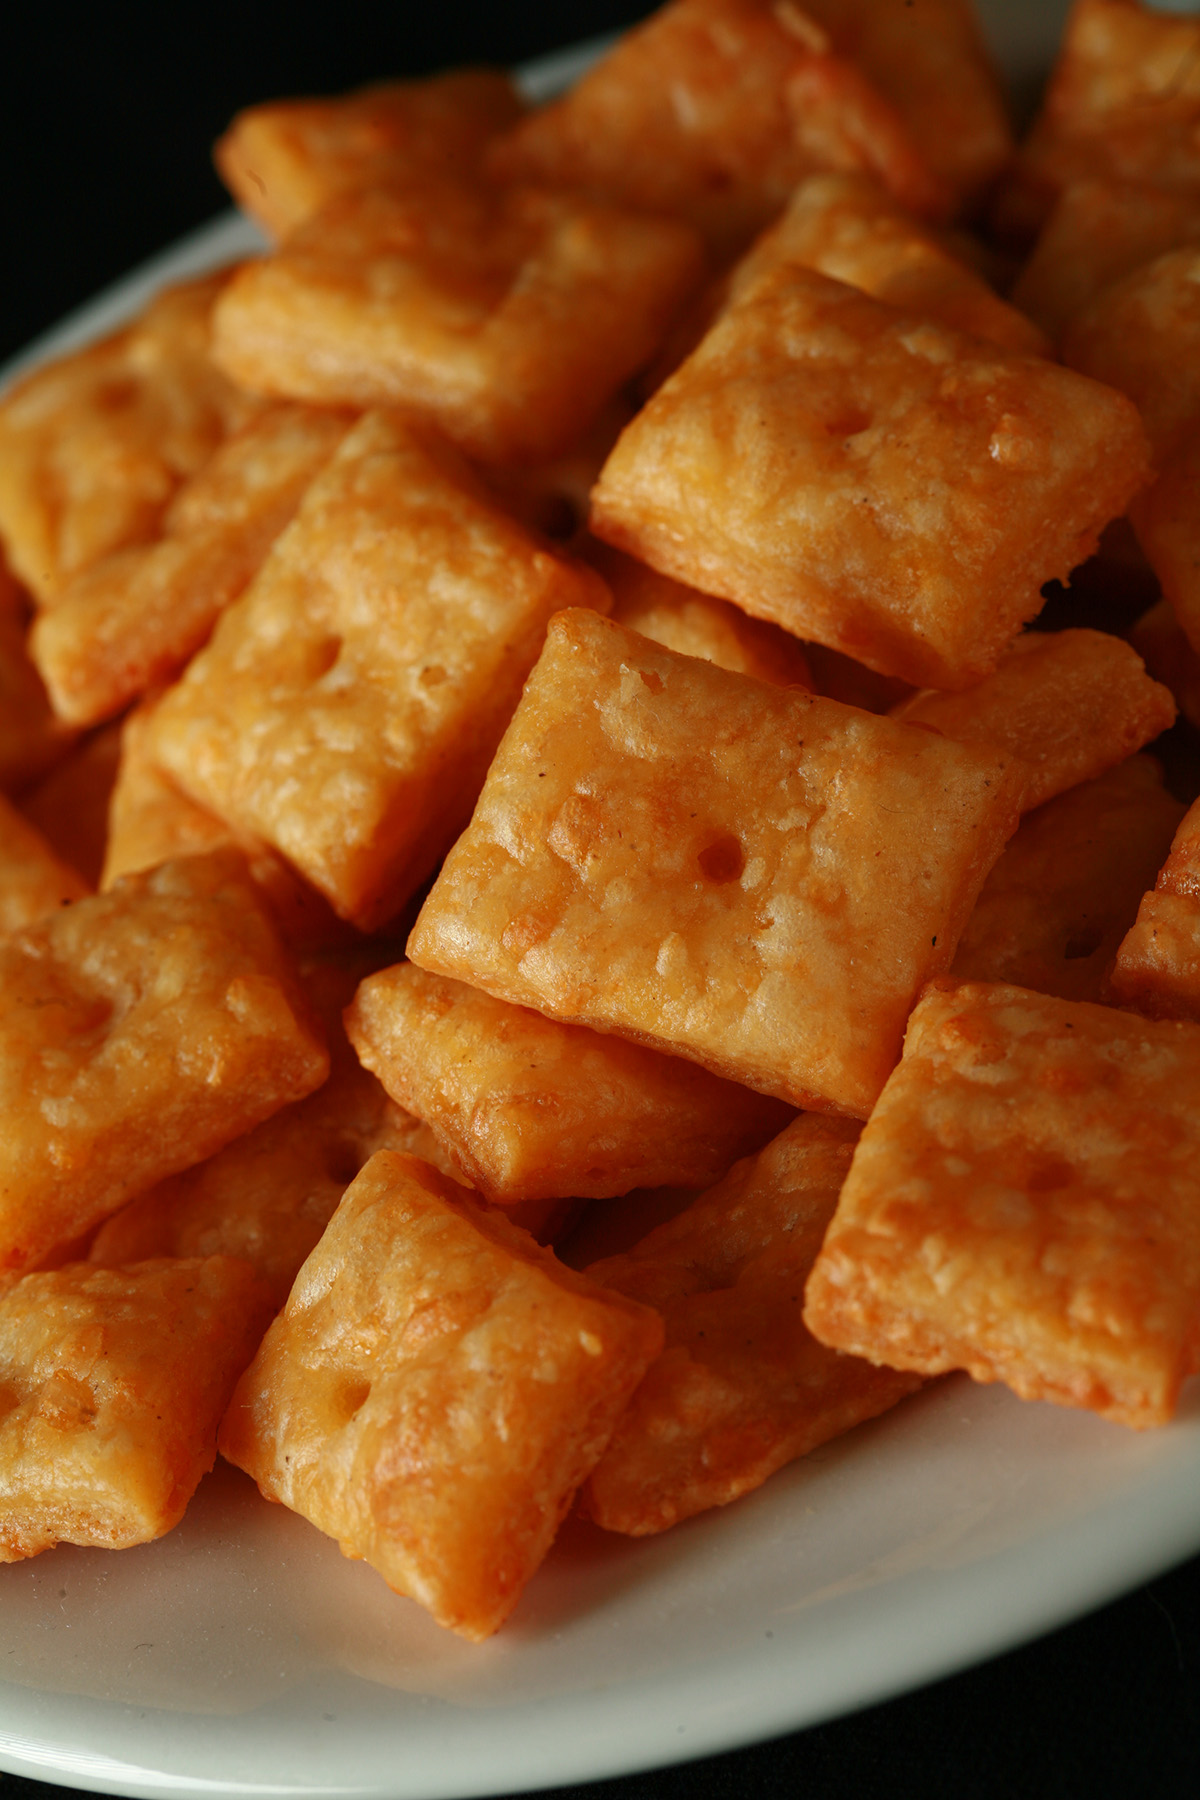 A pile of gluten-Free Cheez-its - little square gluten-free cheese crackers.